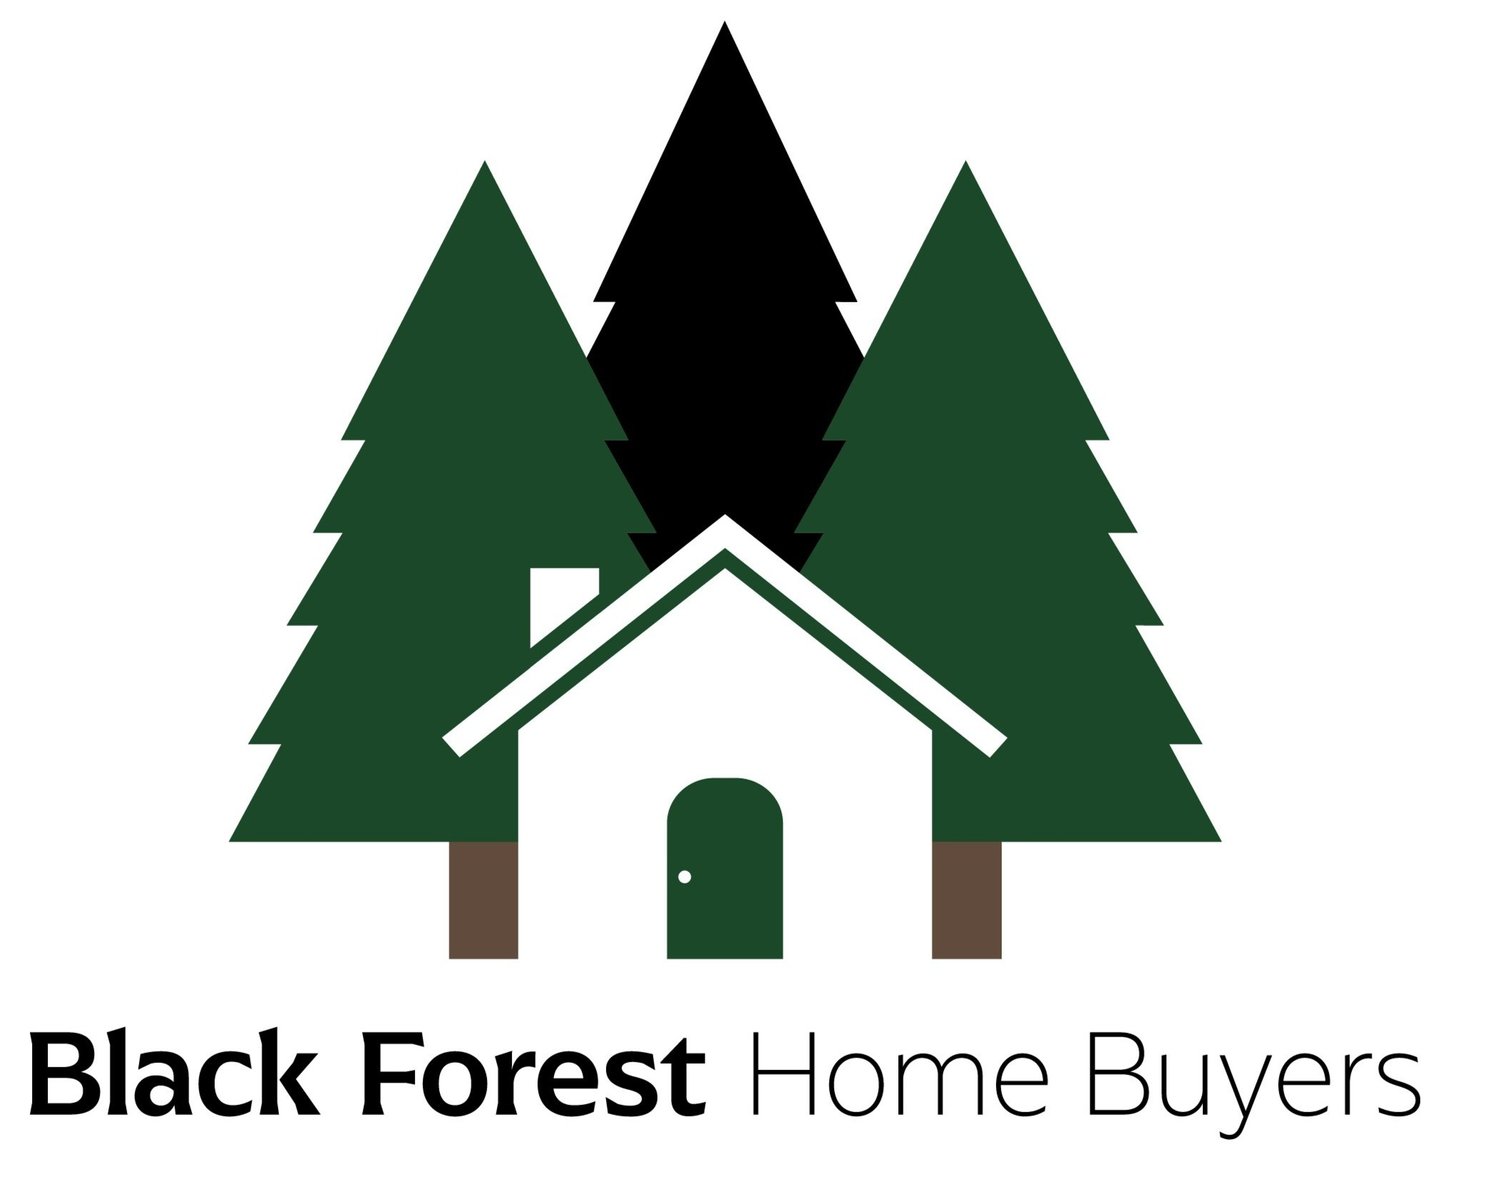 Black Forest Home Buyers